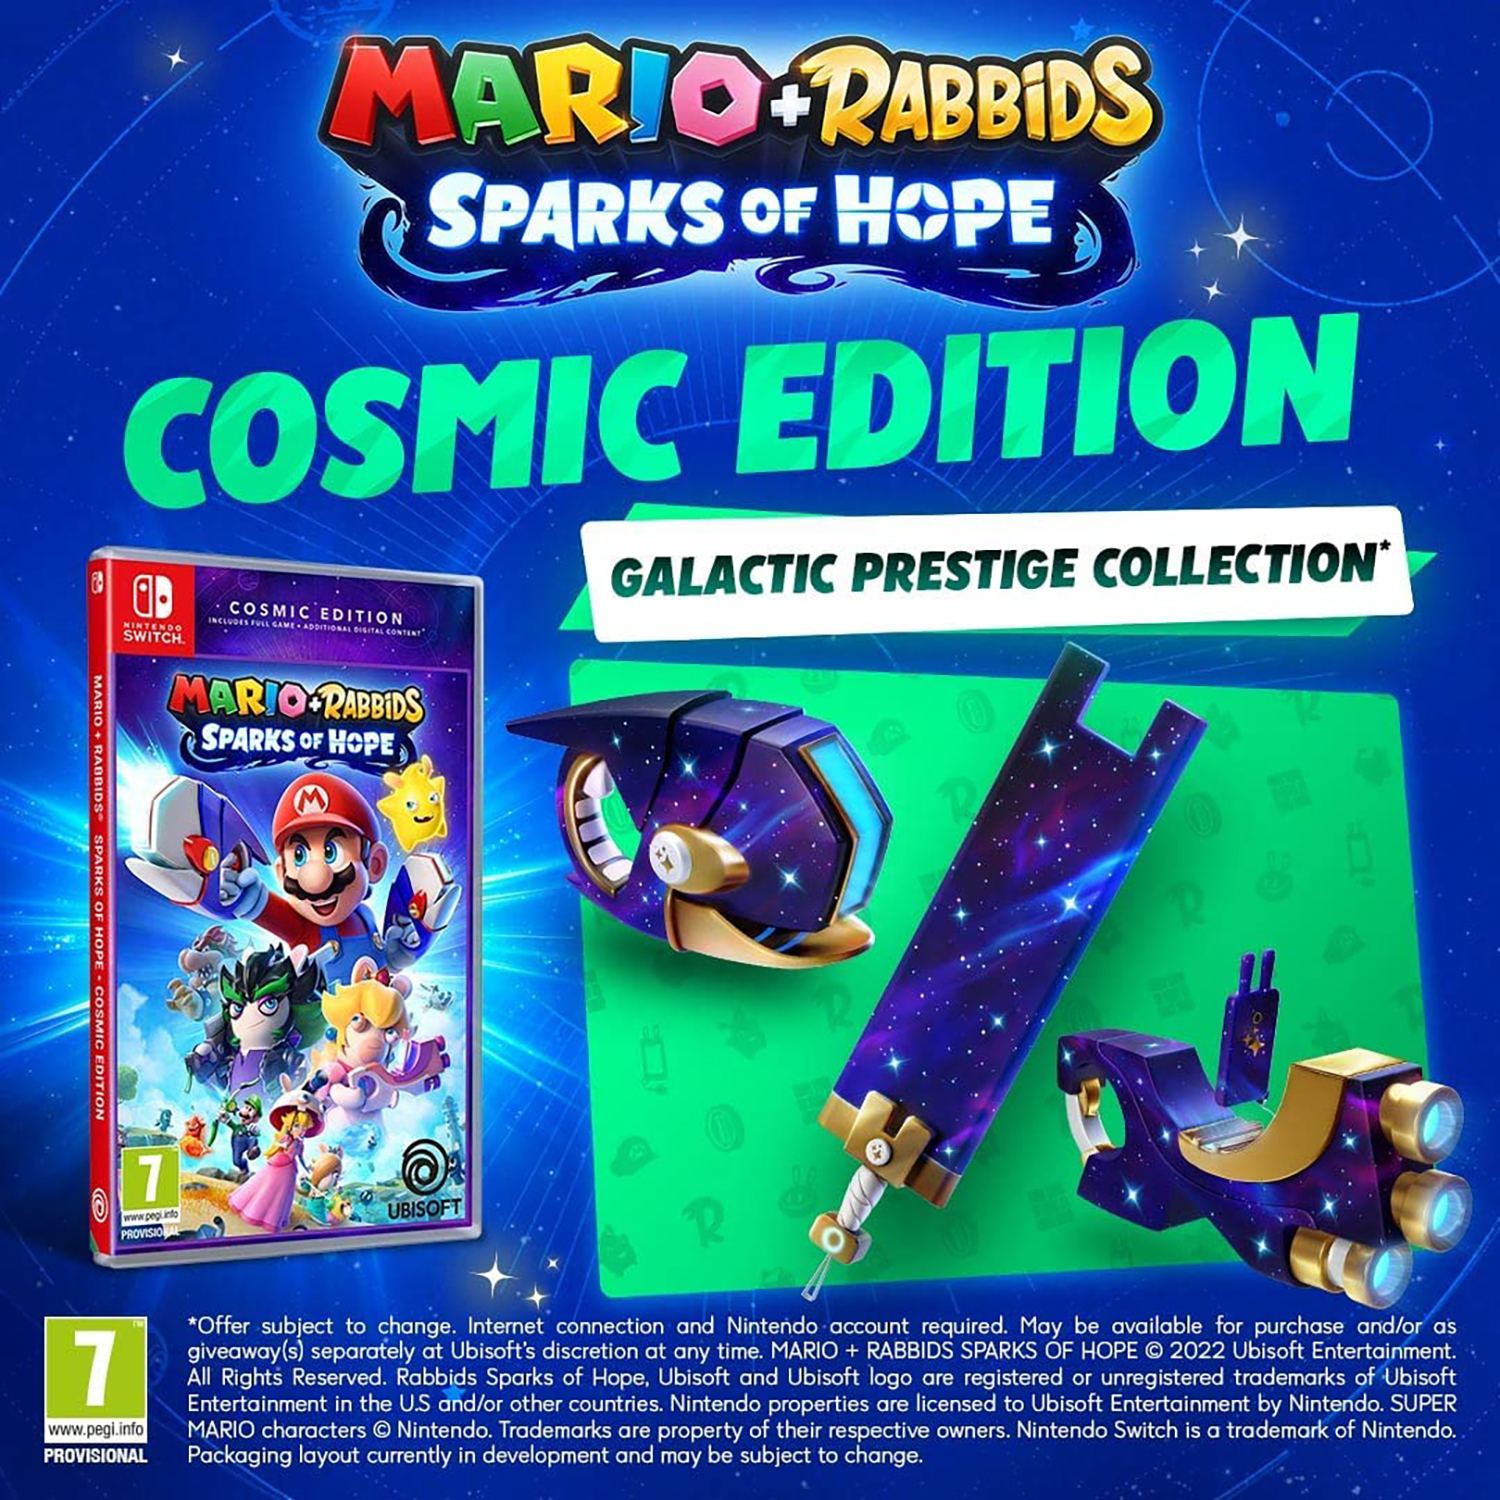 Mario + Rabbids Sparks of Hope [Cosmic Edition] for Nintendo Switch